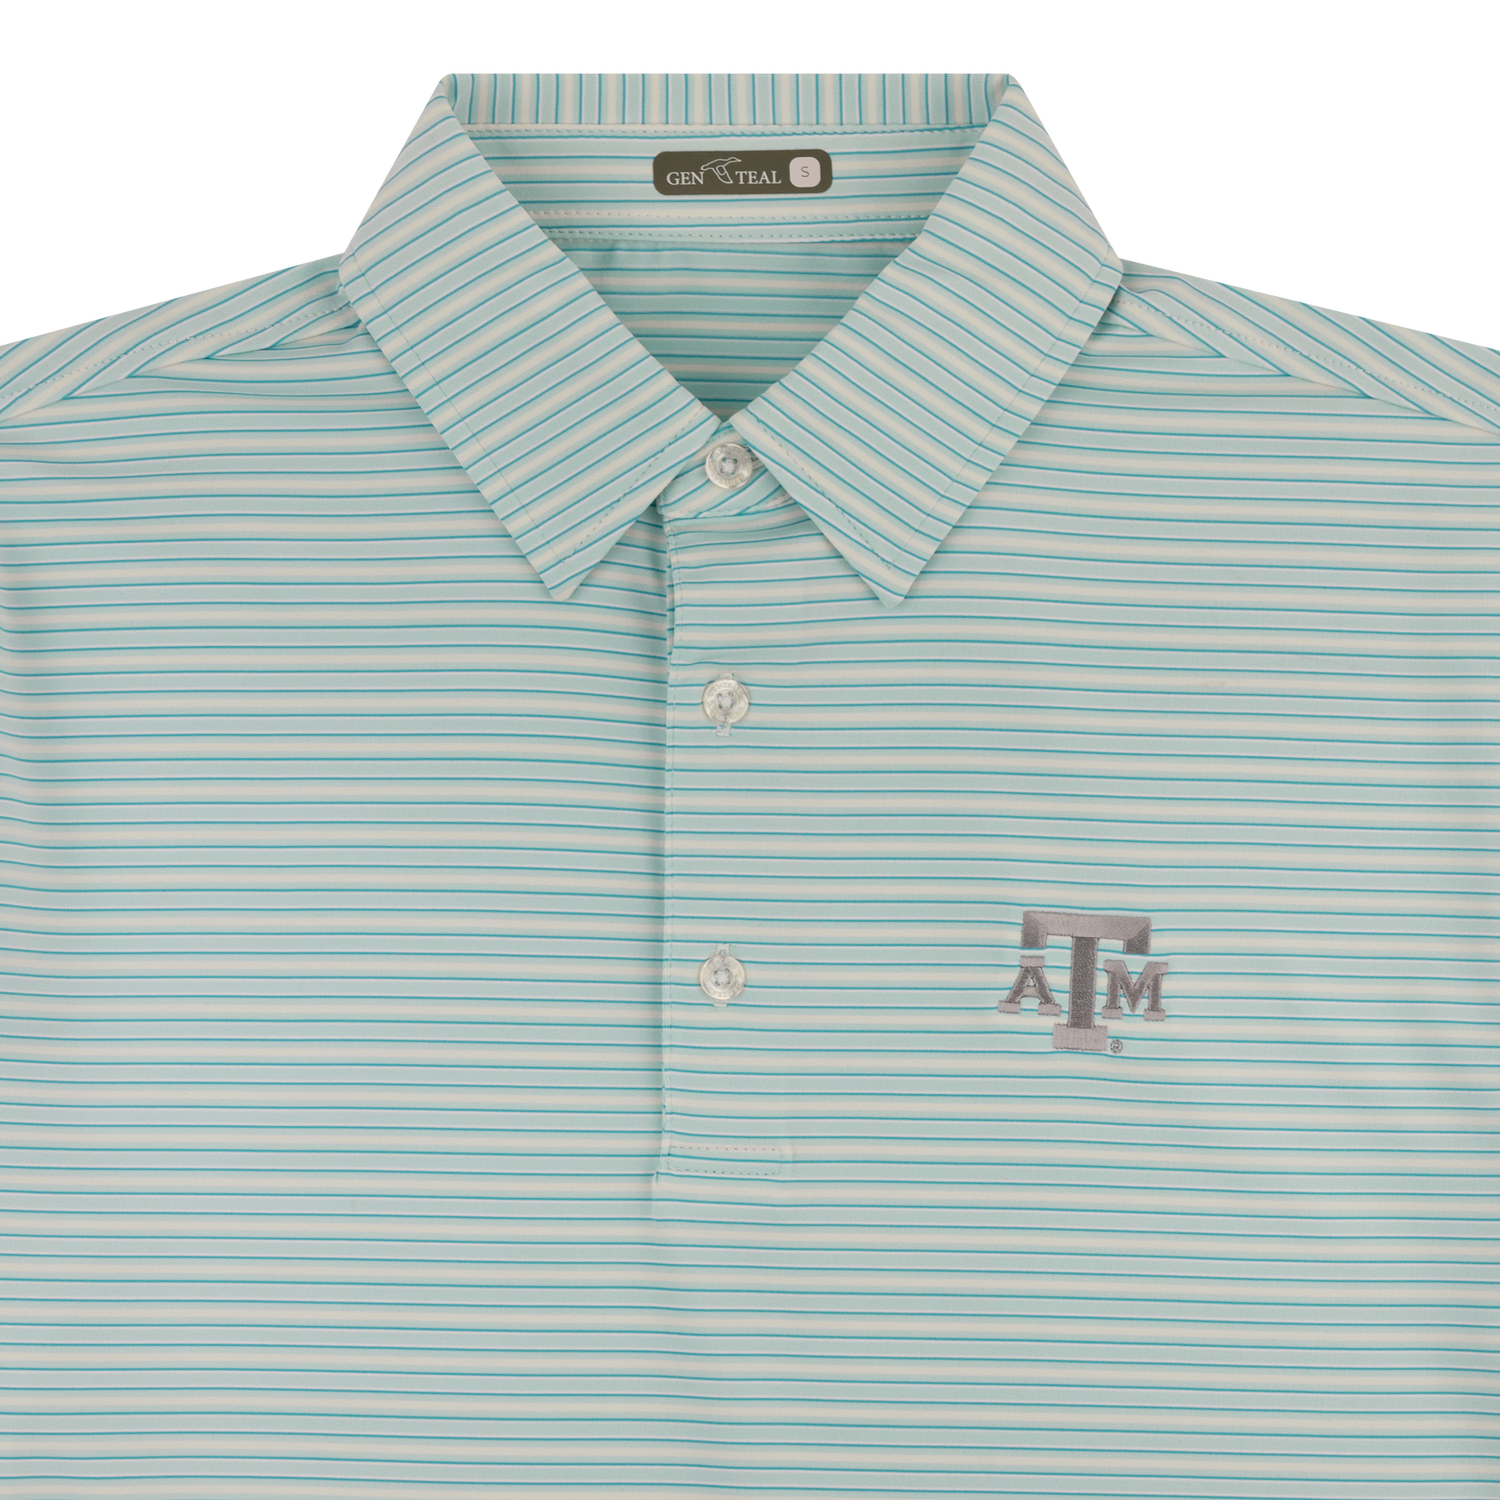 Texas A&M Gen Teal Wrightsville Performance Polo